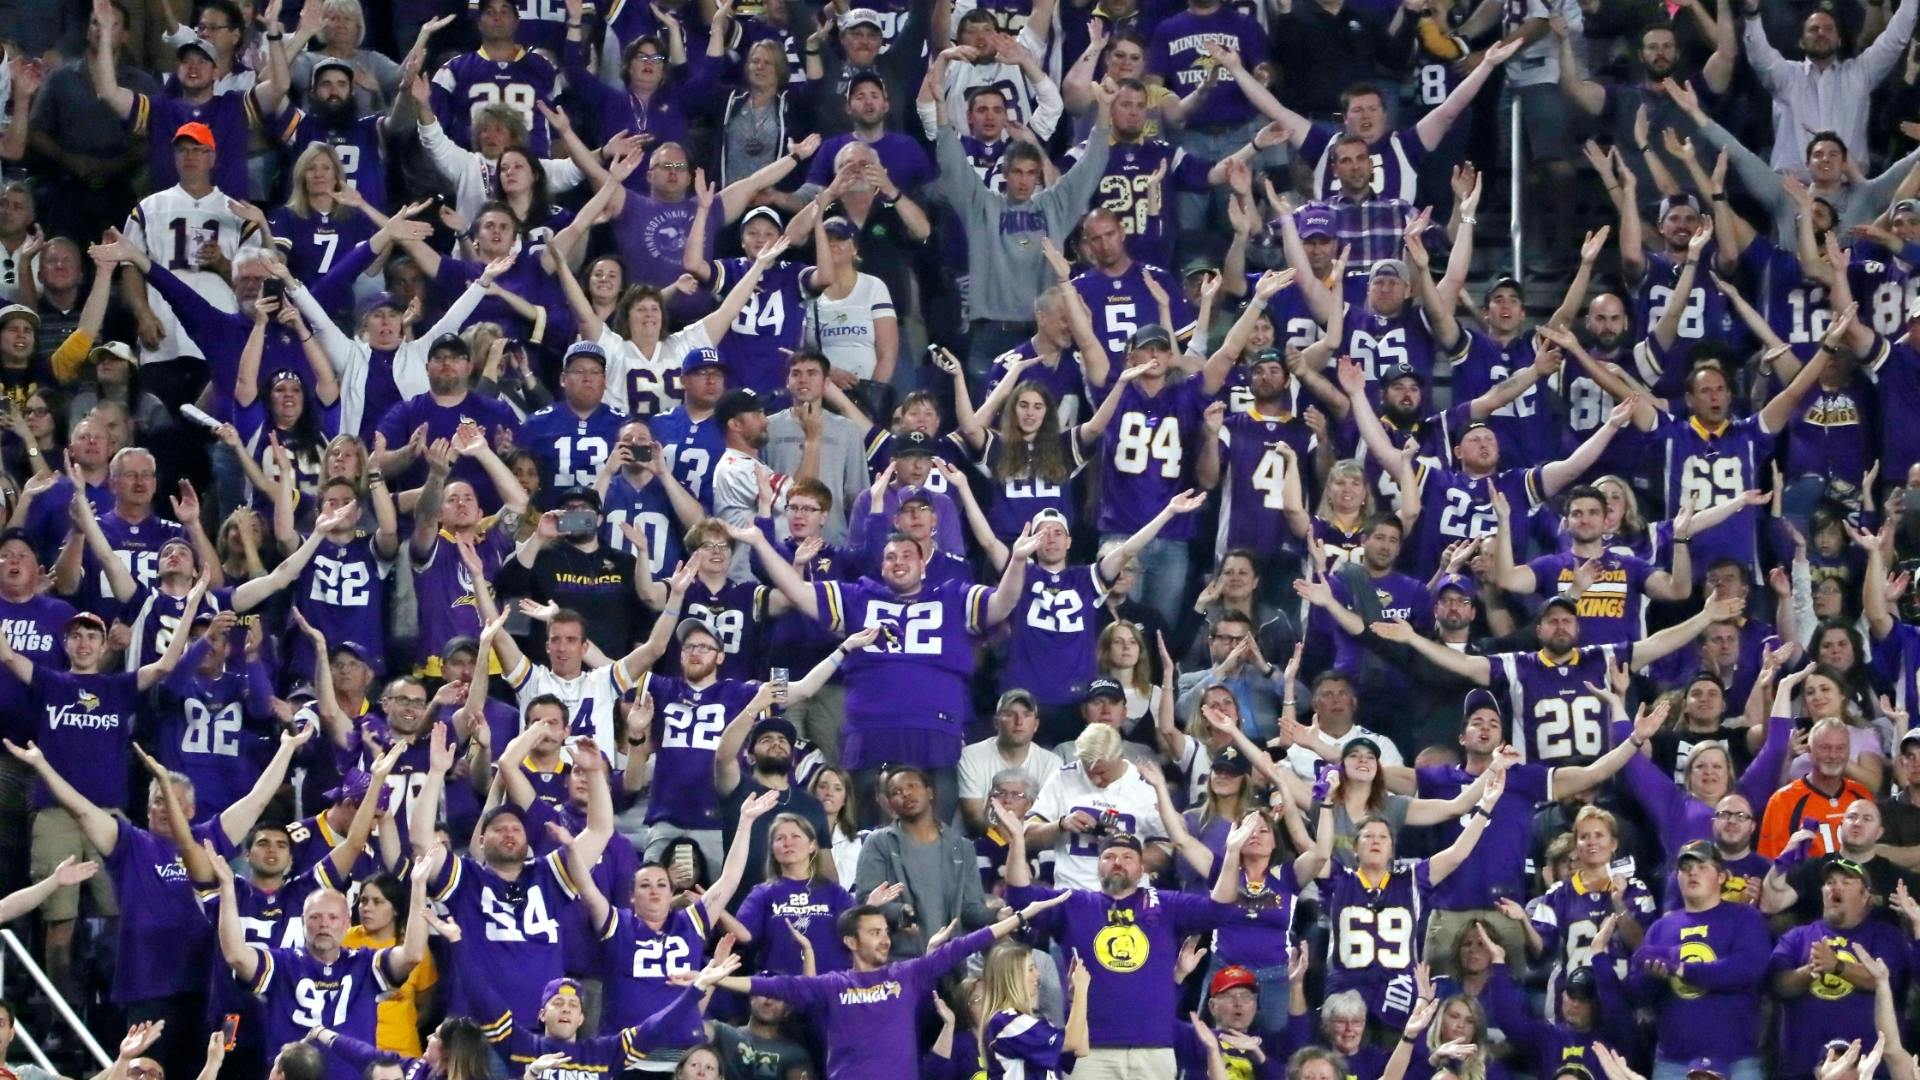 The Vikings are 2-0 in primetime at U.S. Bank Stadium. Relive the excitement of the Monday Night Football spotlight captured on our Star Tribune Snapchat story.